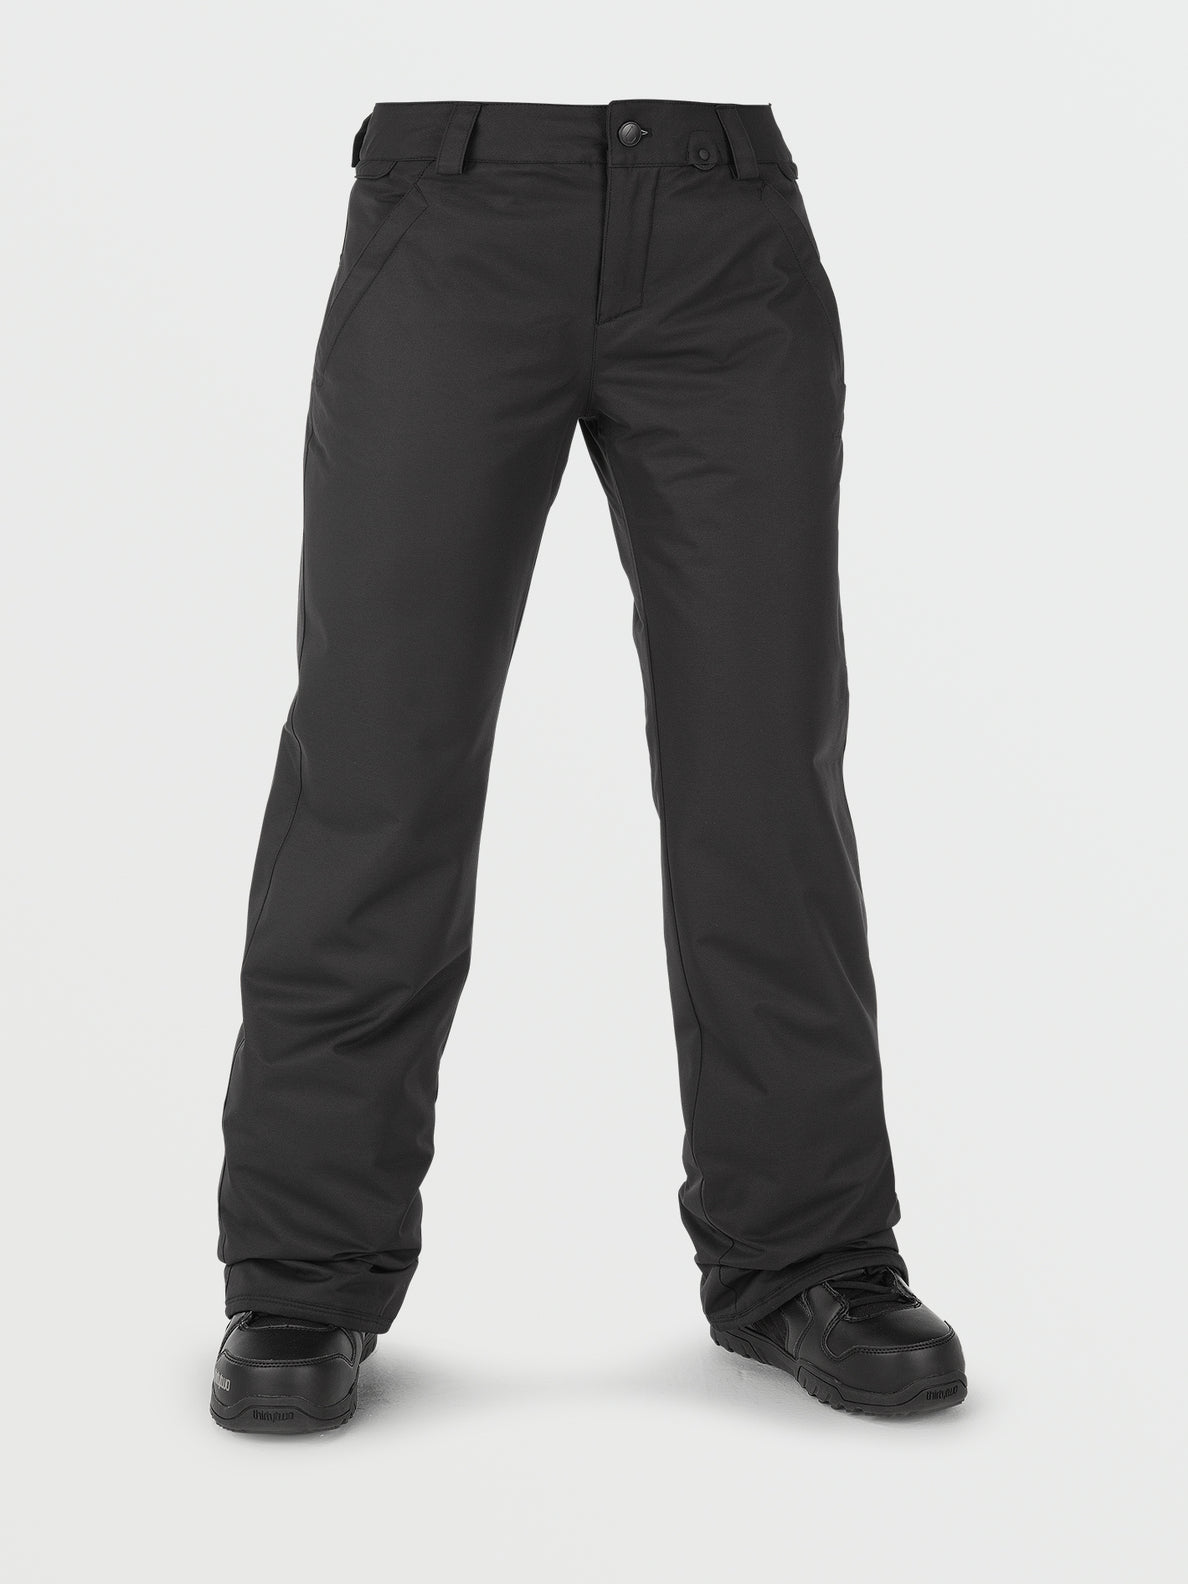 Womens Frochickie Insulated Pants - Black (H1252303_BLK) [7]